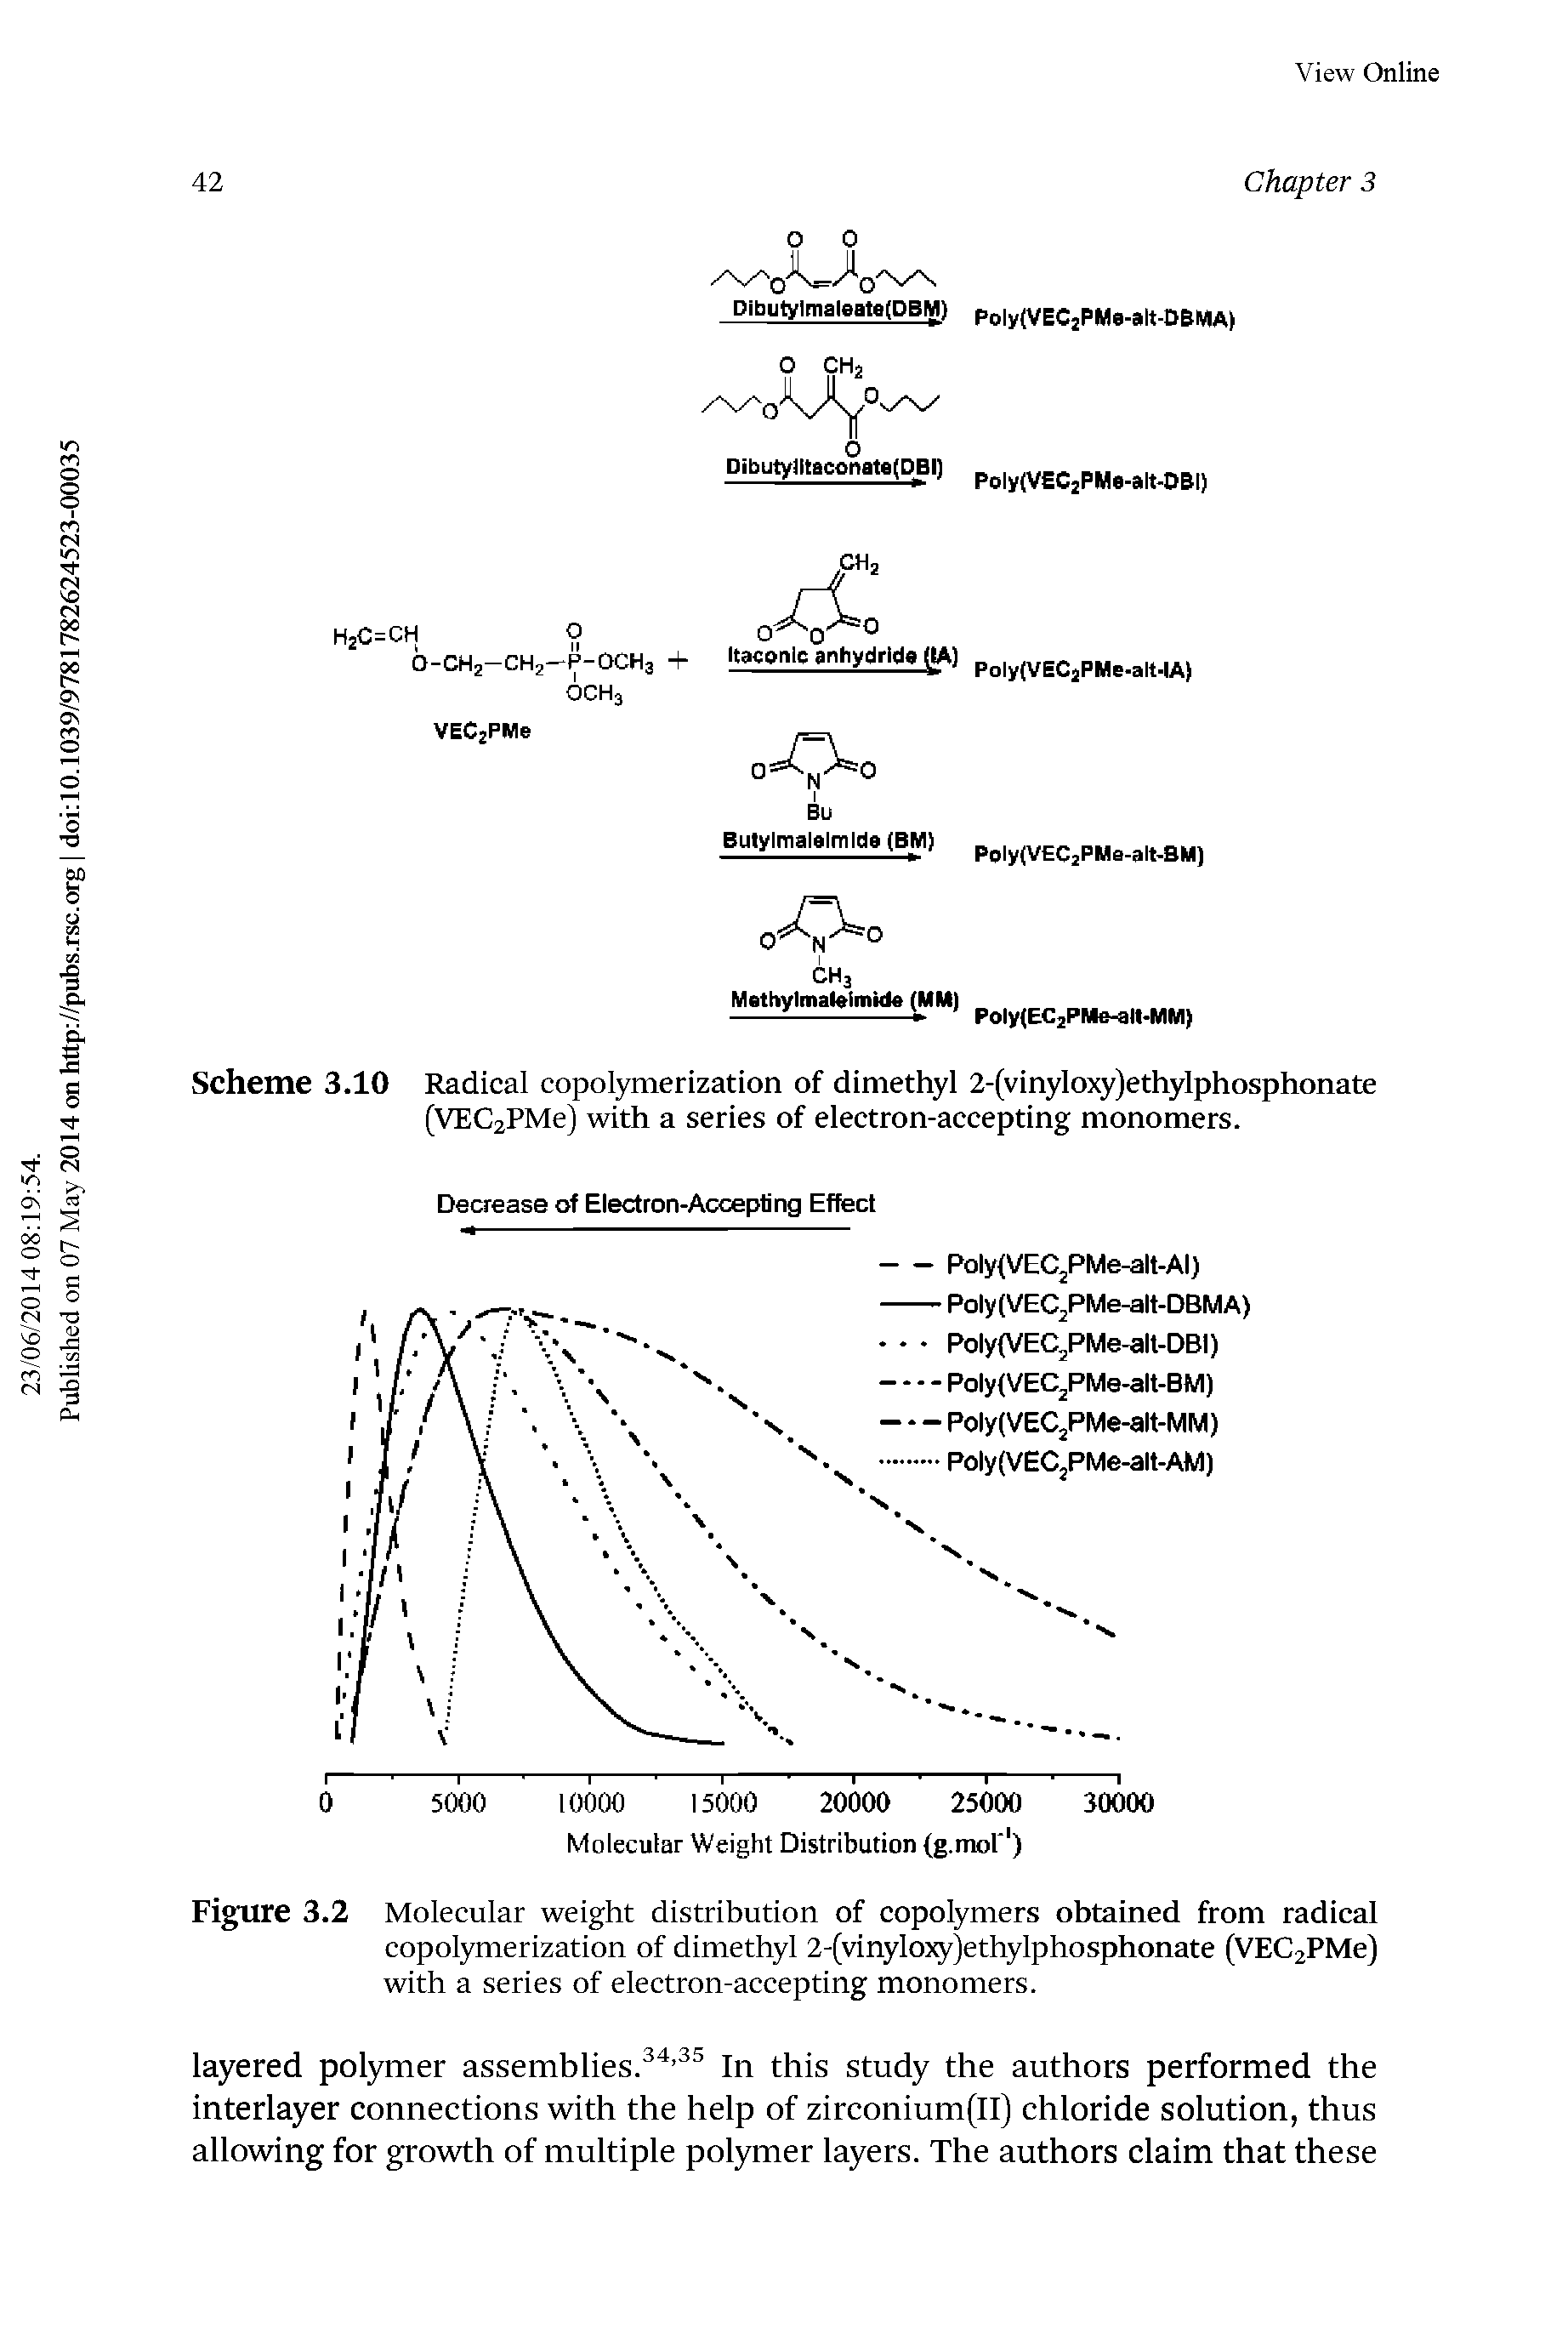 Figure 3.2 Molecular weight distribution of copolymers obtained from radical copolymerization of dimethyl 2-(vinylo5y)ethylphosphonate (VEC2PMe) with a series of electron-accepting monomers.